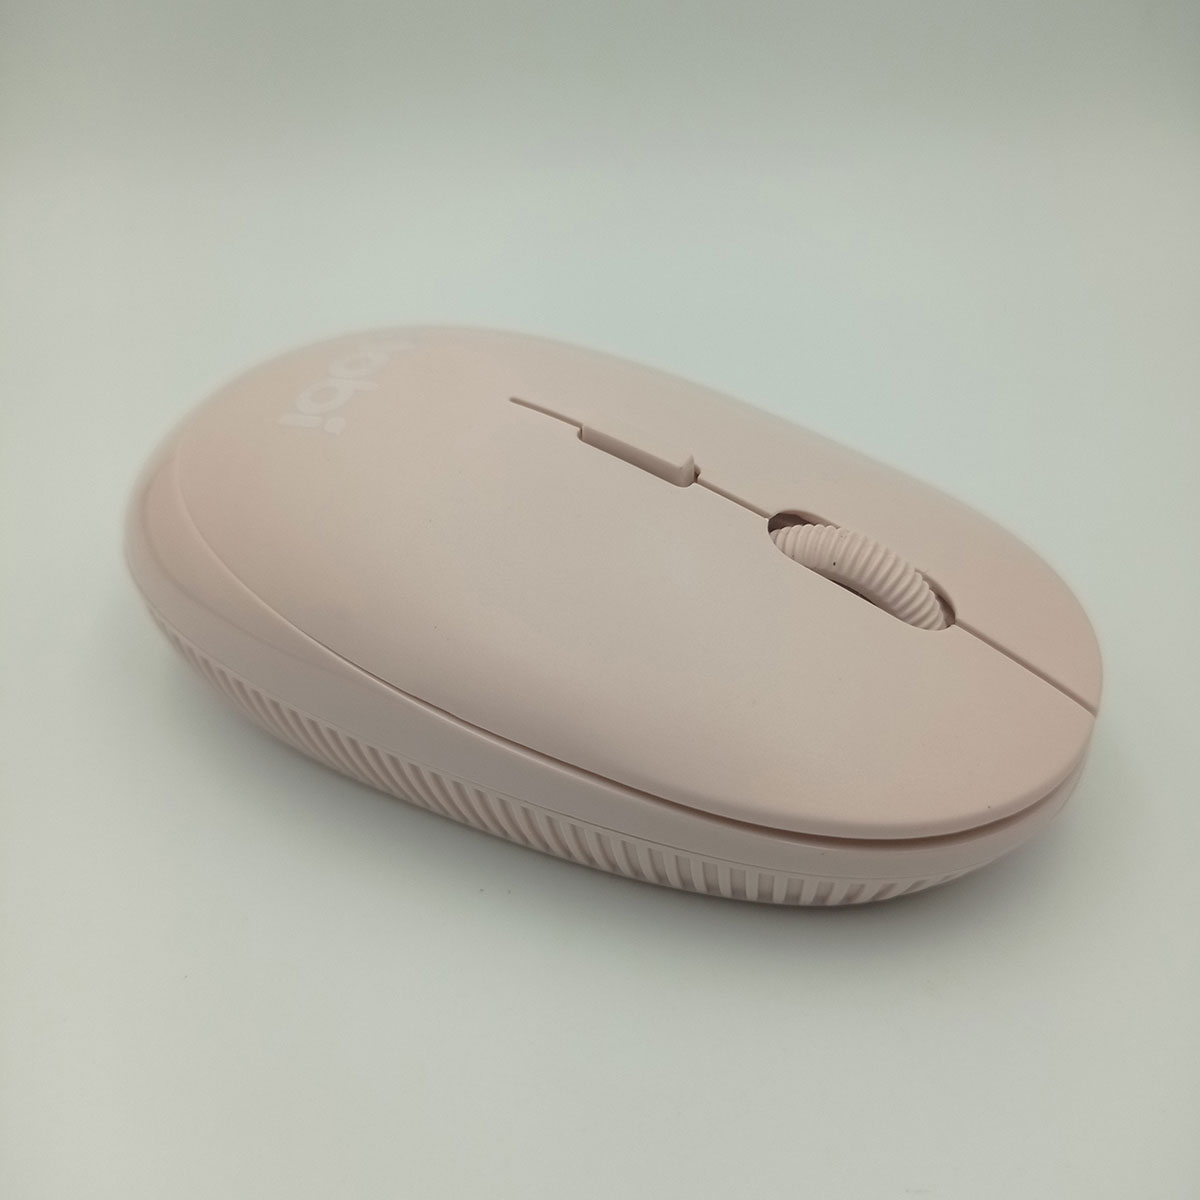 nm71-wireless-mouse-pink-02